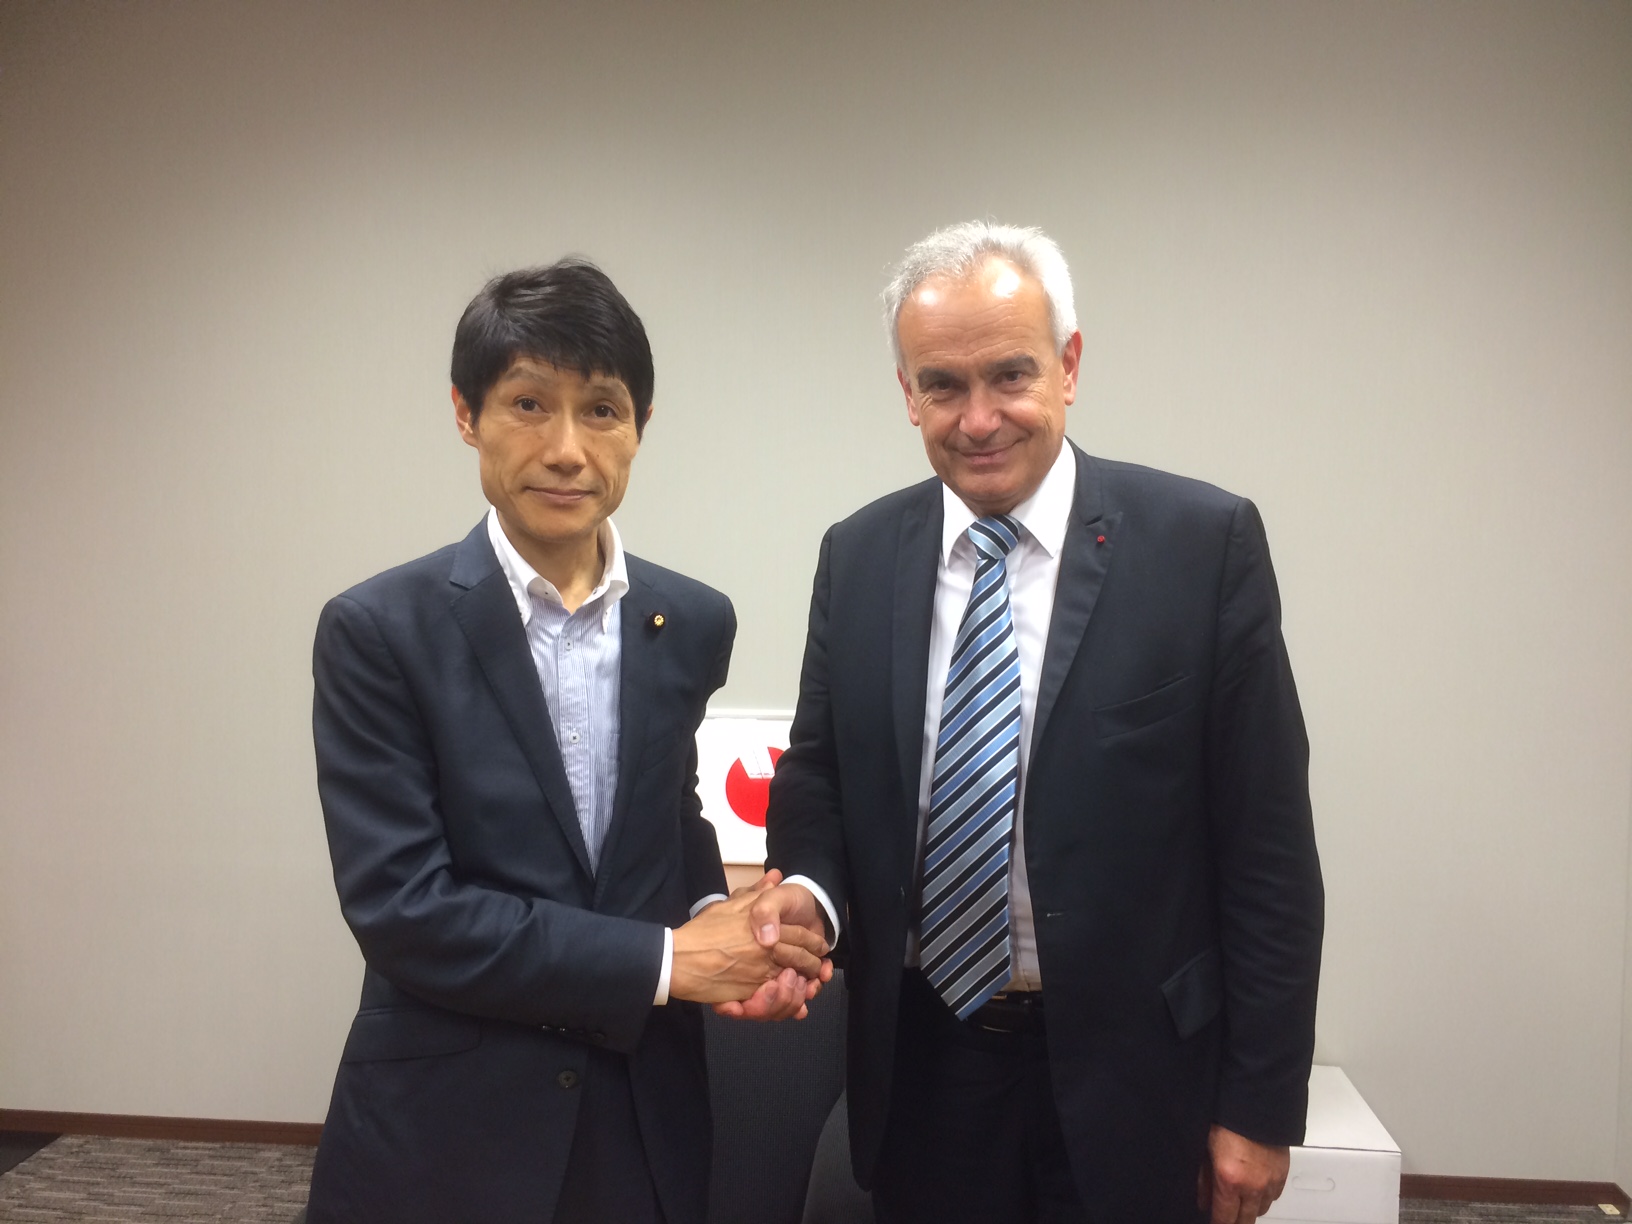 The Director General of the OIV visits Japan and Korea for the first time